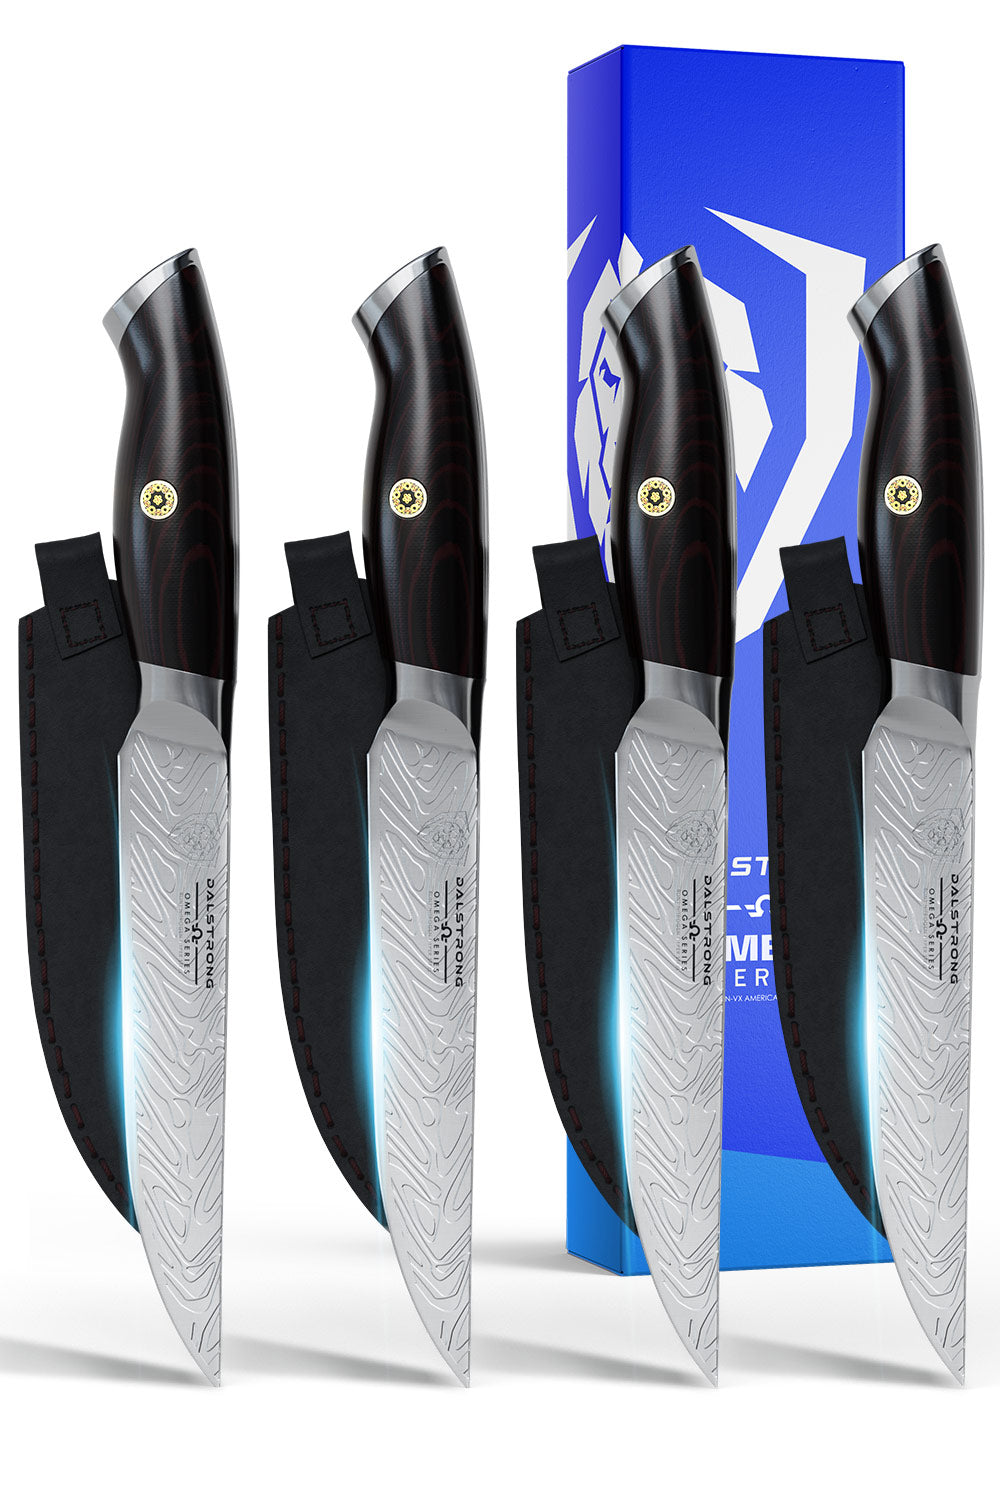 Dalstrong omega series 5 inch steak knife set in front of it's premium packaging.